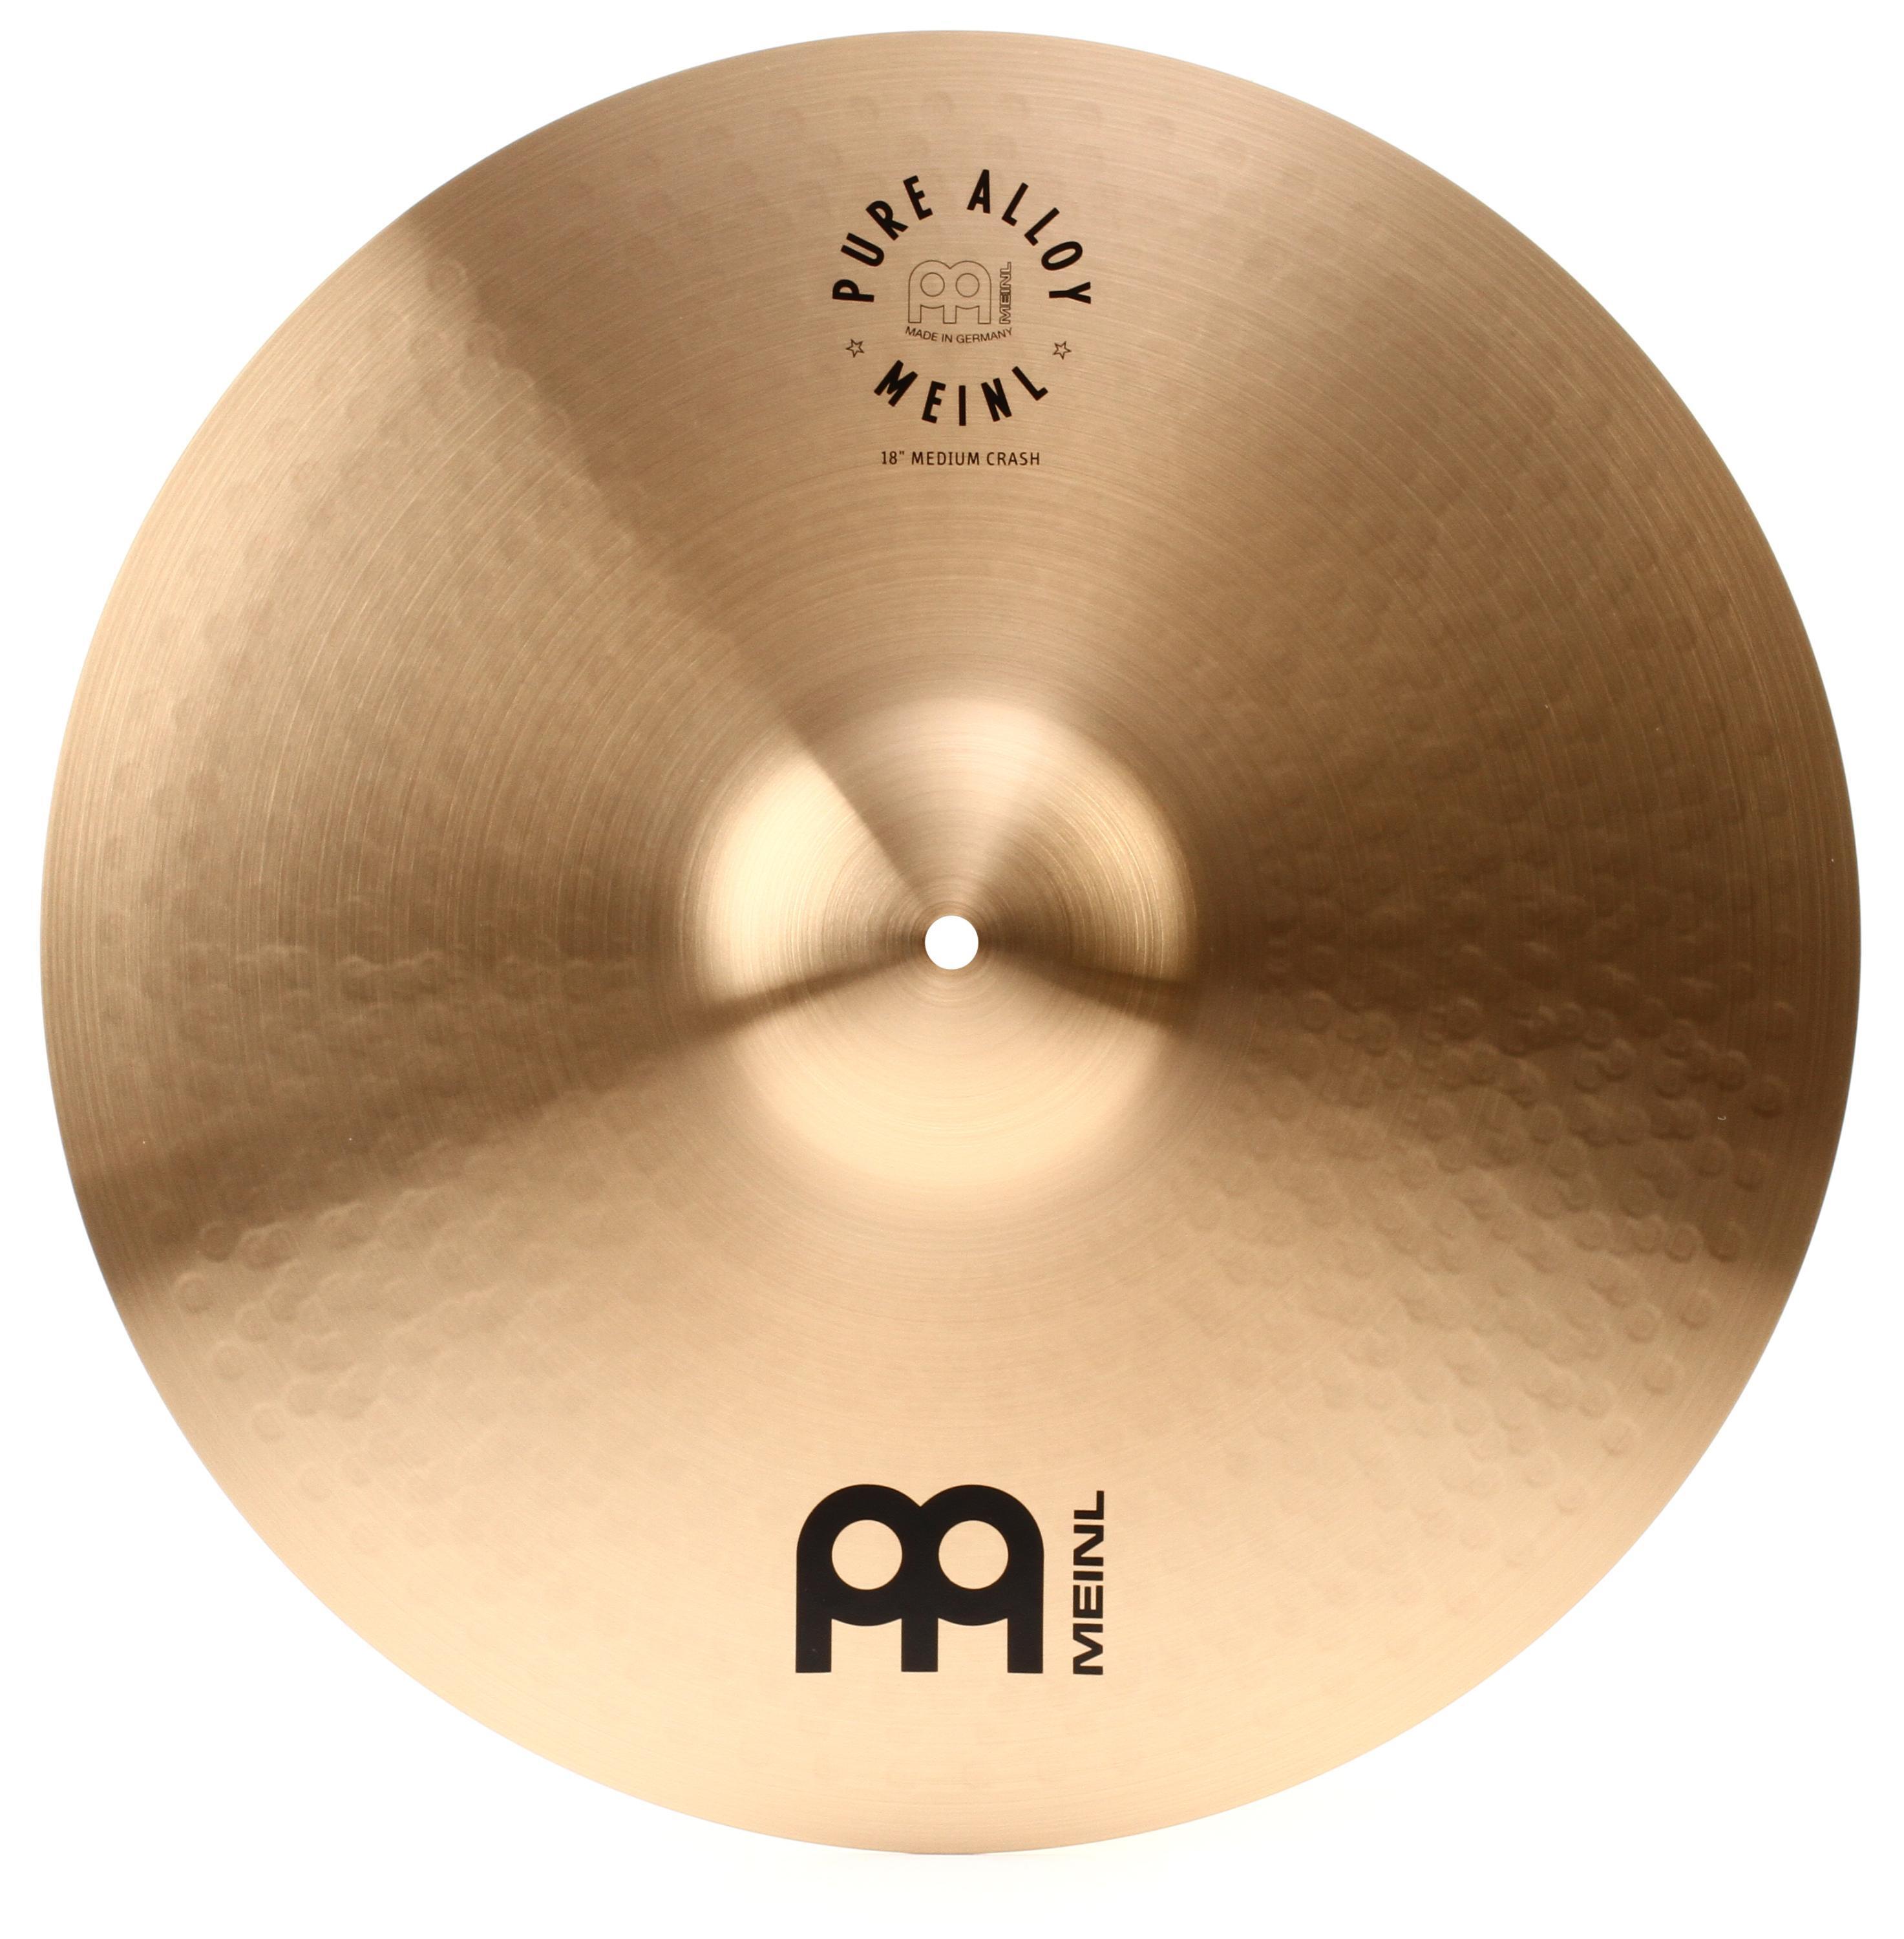 Meinl Cymbals 18 inch Pure Alloy Medium Crash Cymbal | Sweetwater